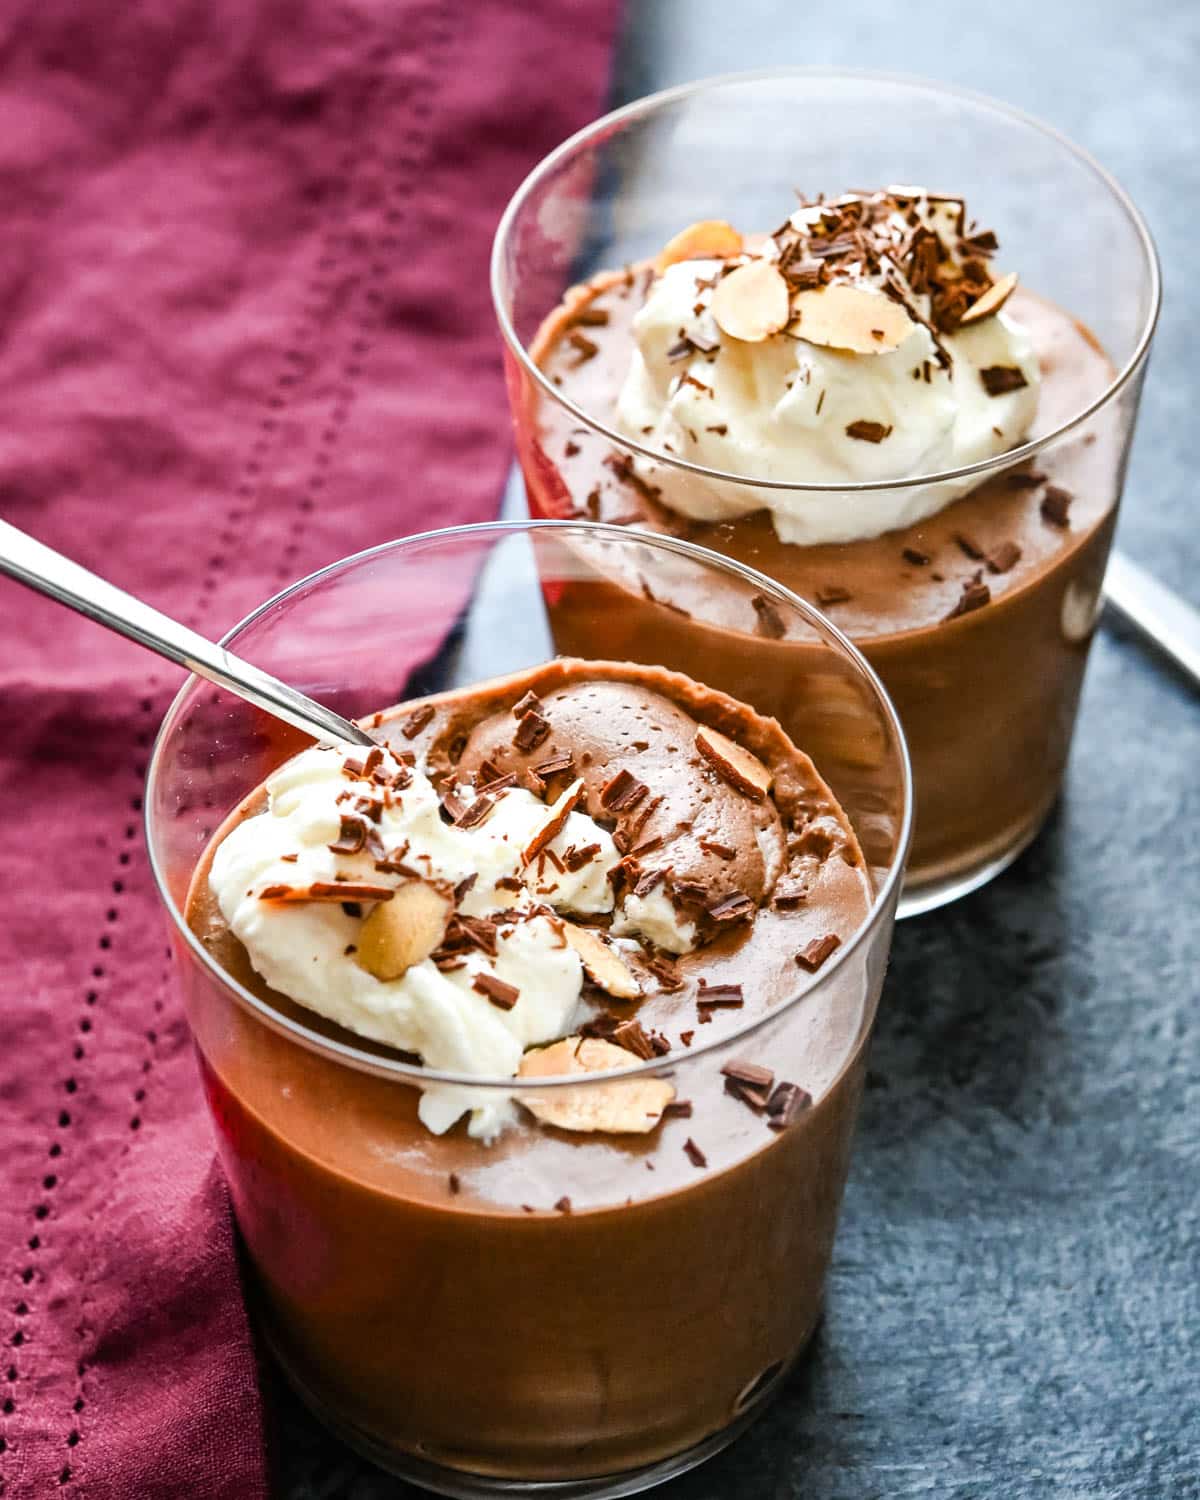 Two chocolate mousses with whipped cream and chocolate shavings.